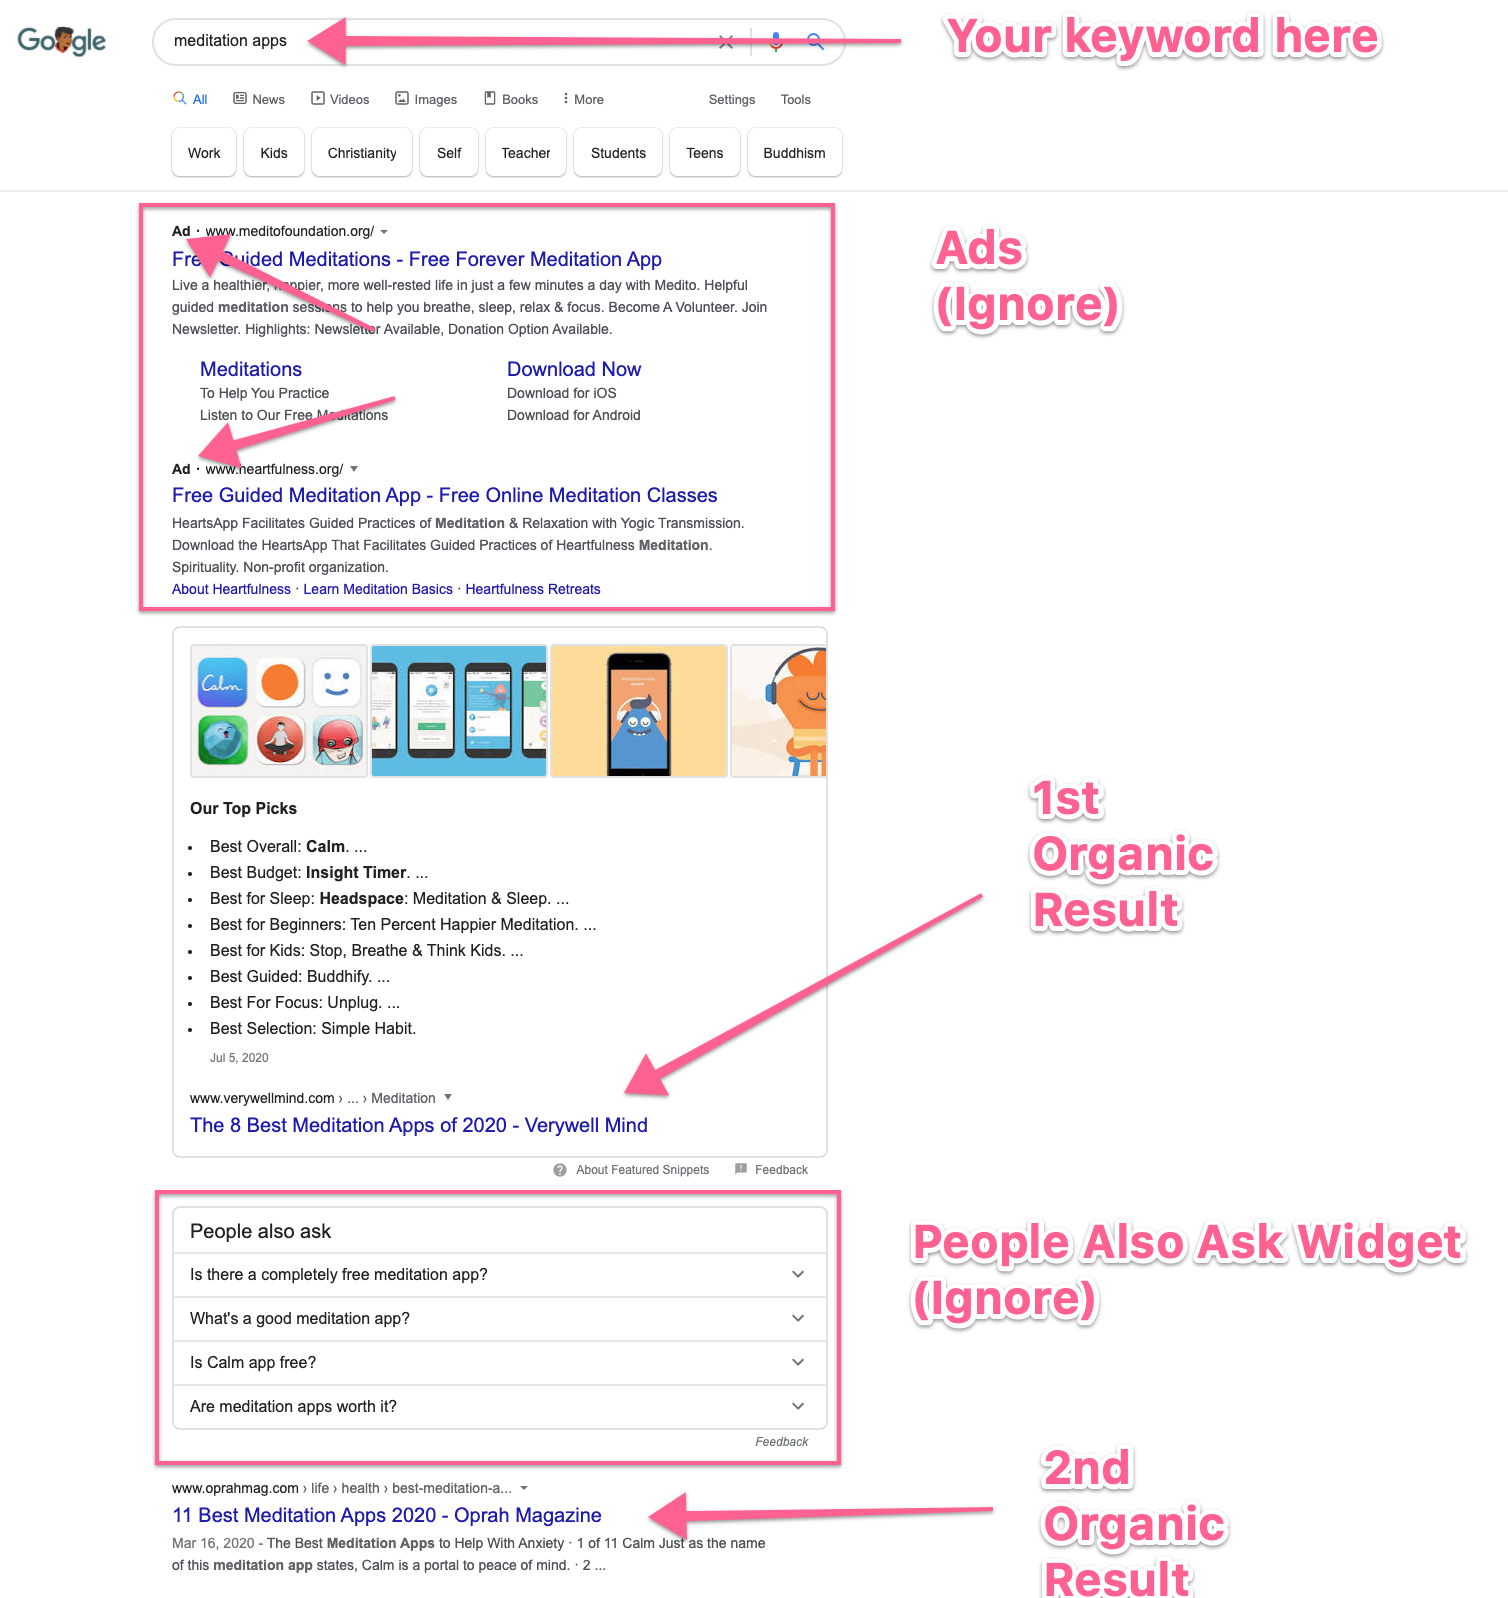 Search your keyword in incognito mode on Google